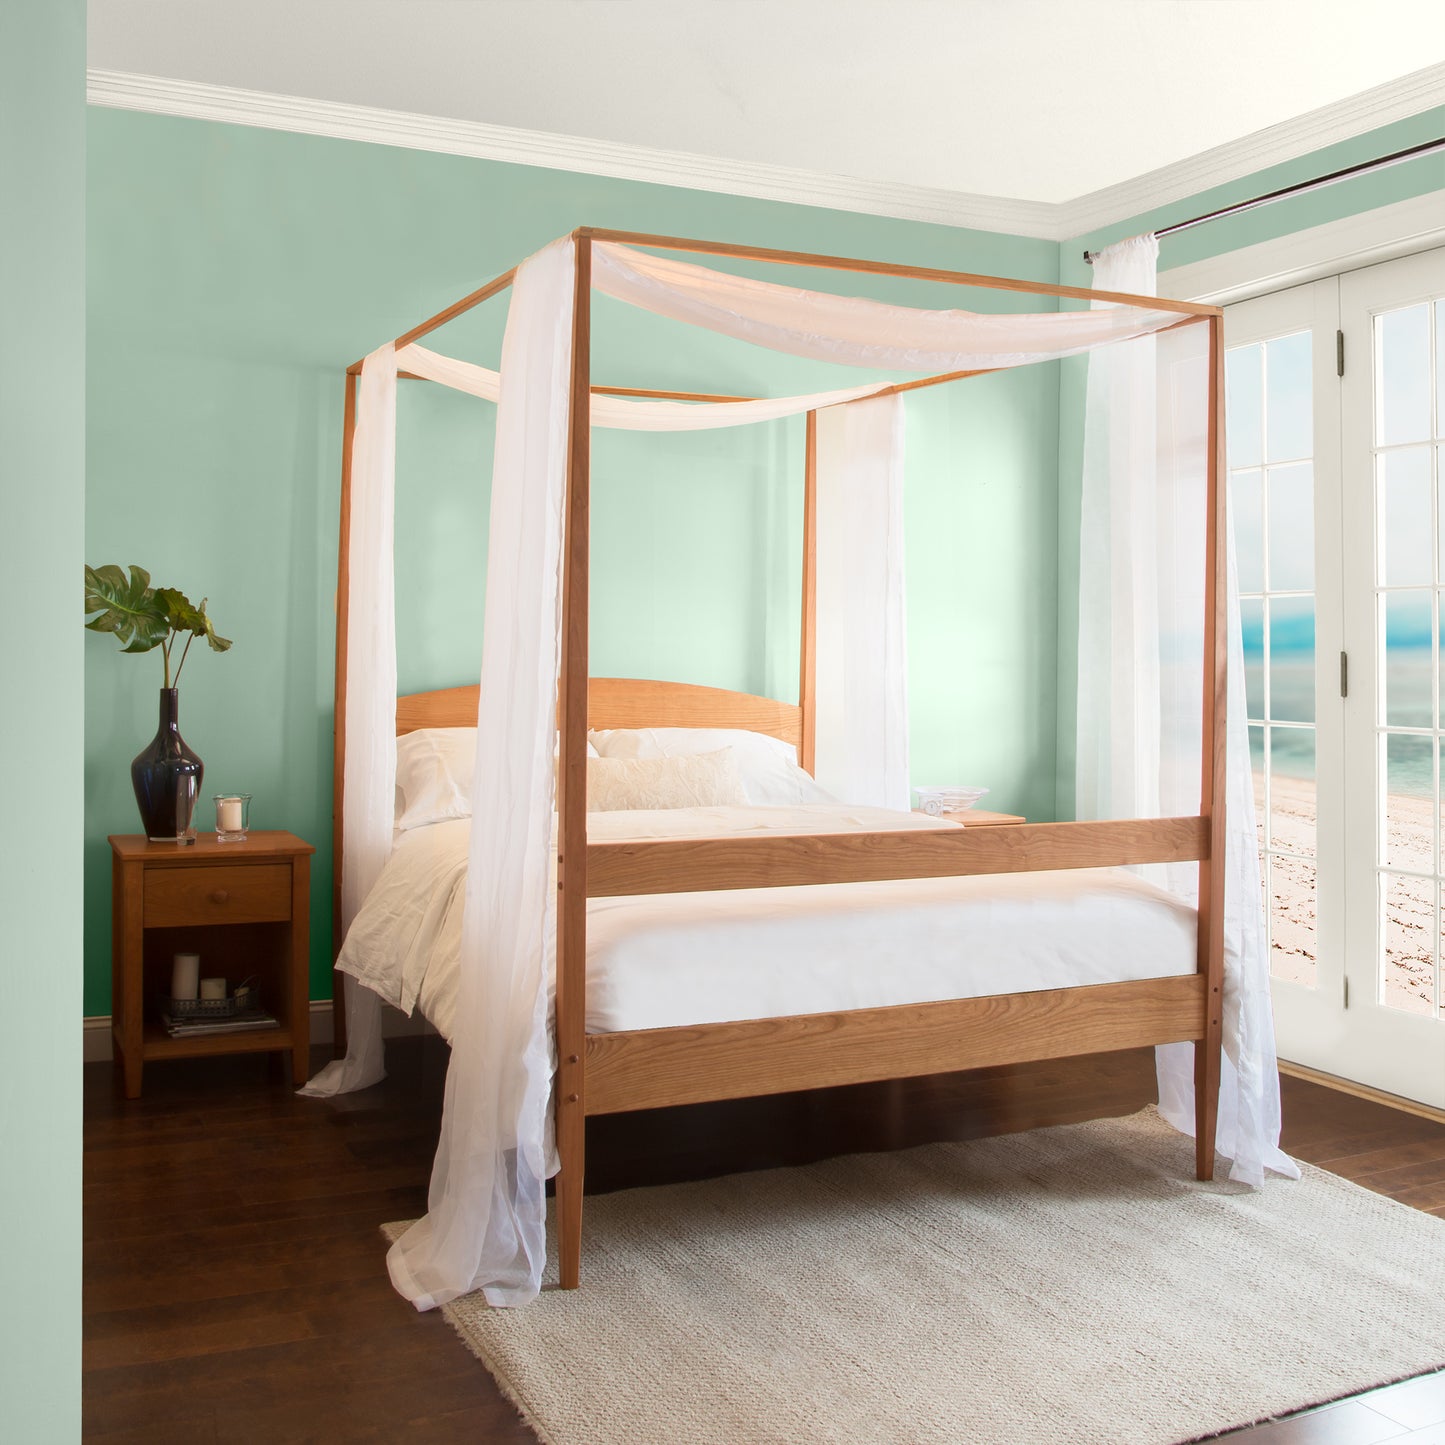 A bedroom with green walls and a white Vermont Shaker Four Poster Bed with Canopy made by Maple Corner Woodworks.